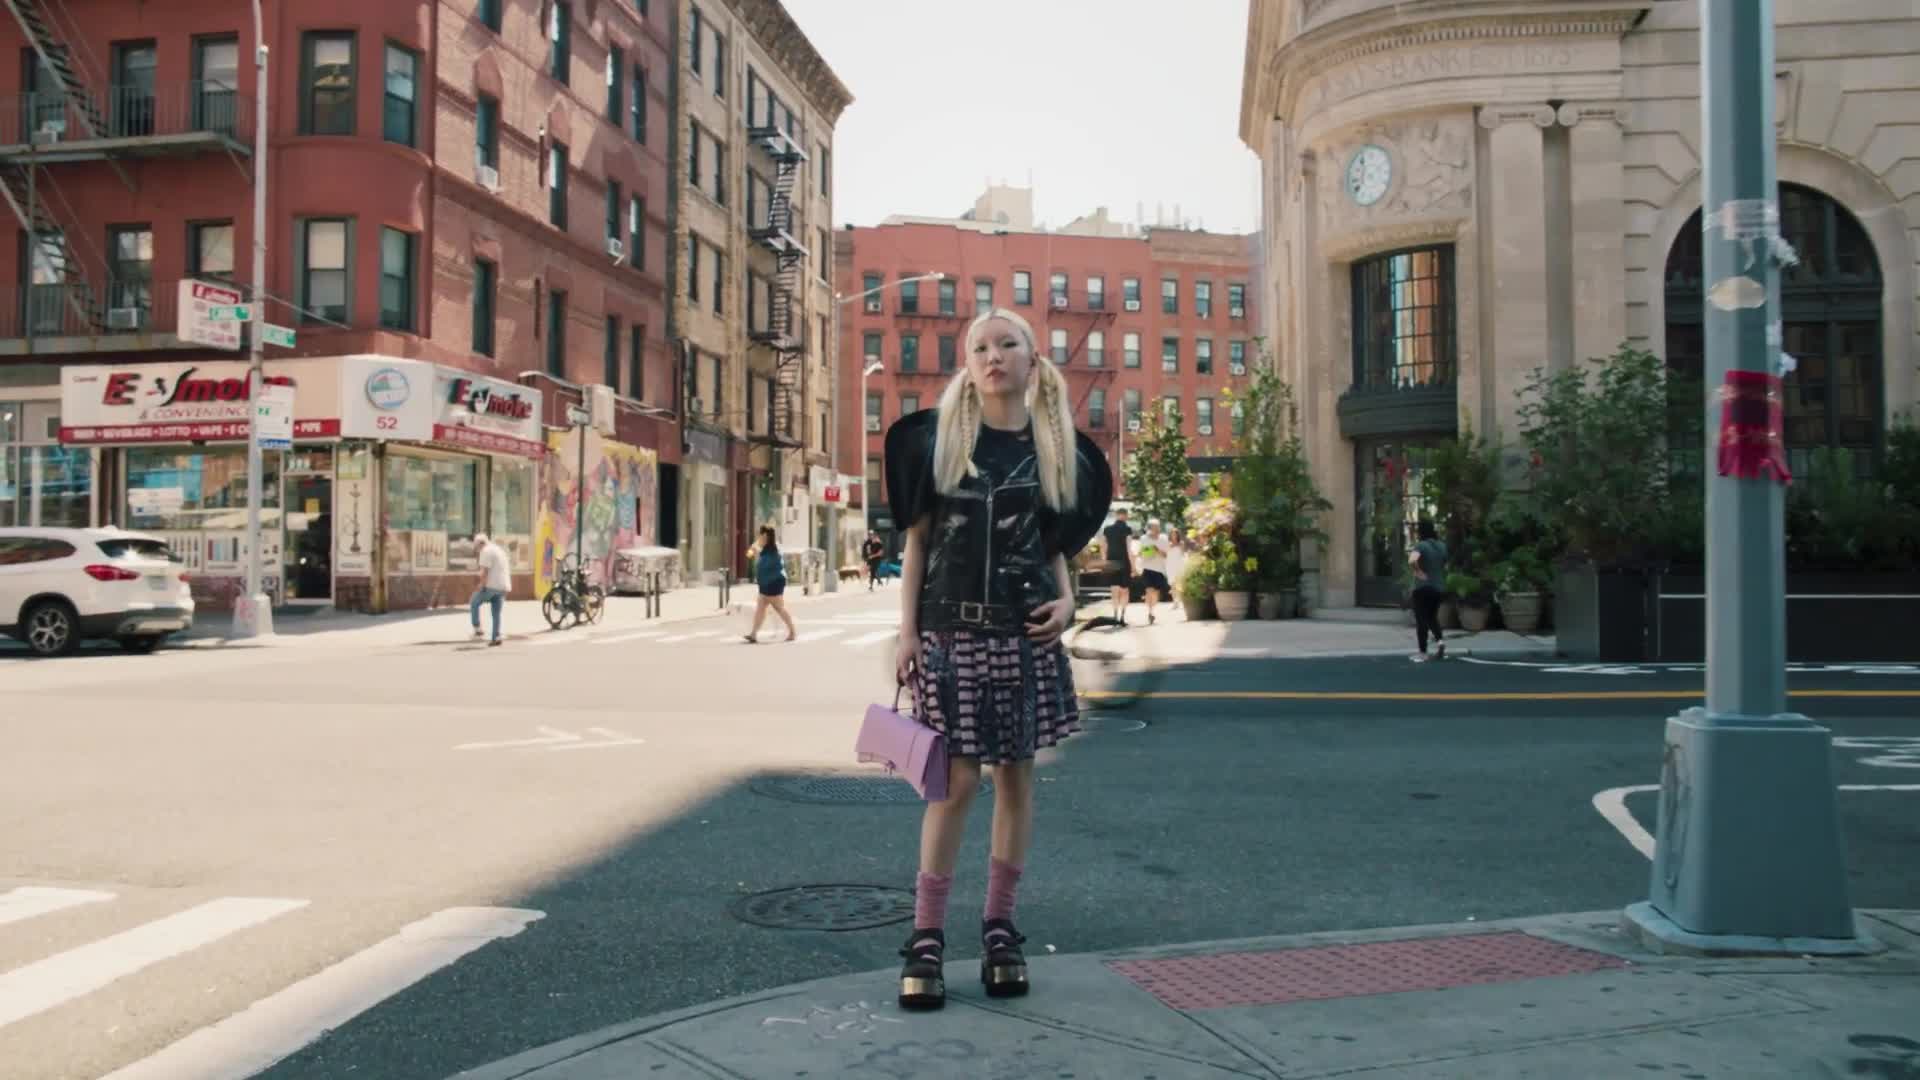 Watch Street Style Obsessed? You Won't Want to Miss Our New Video